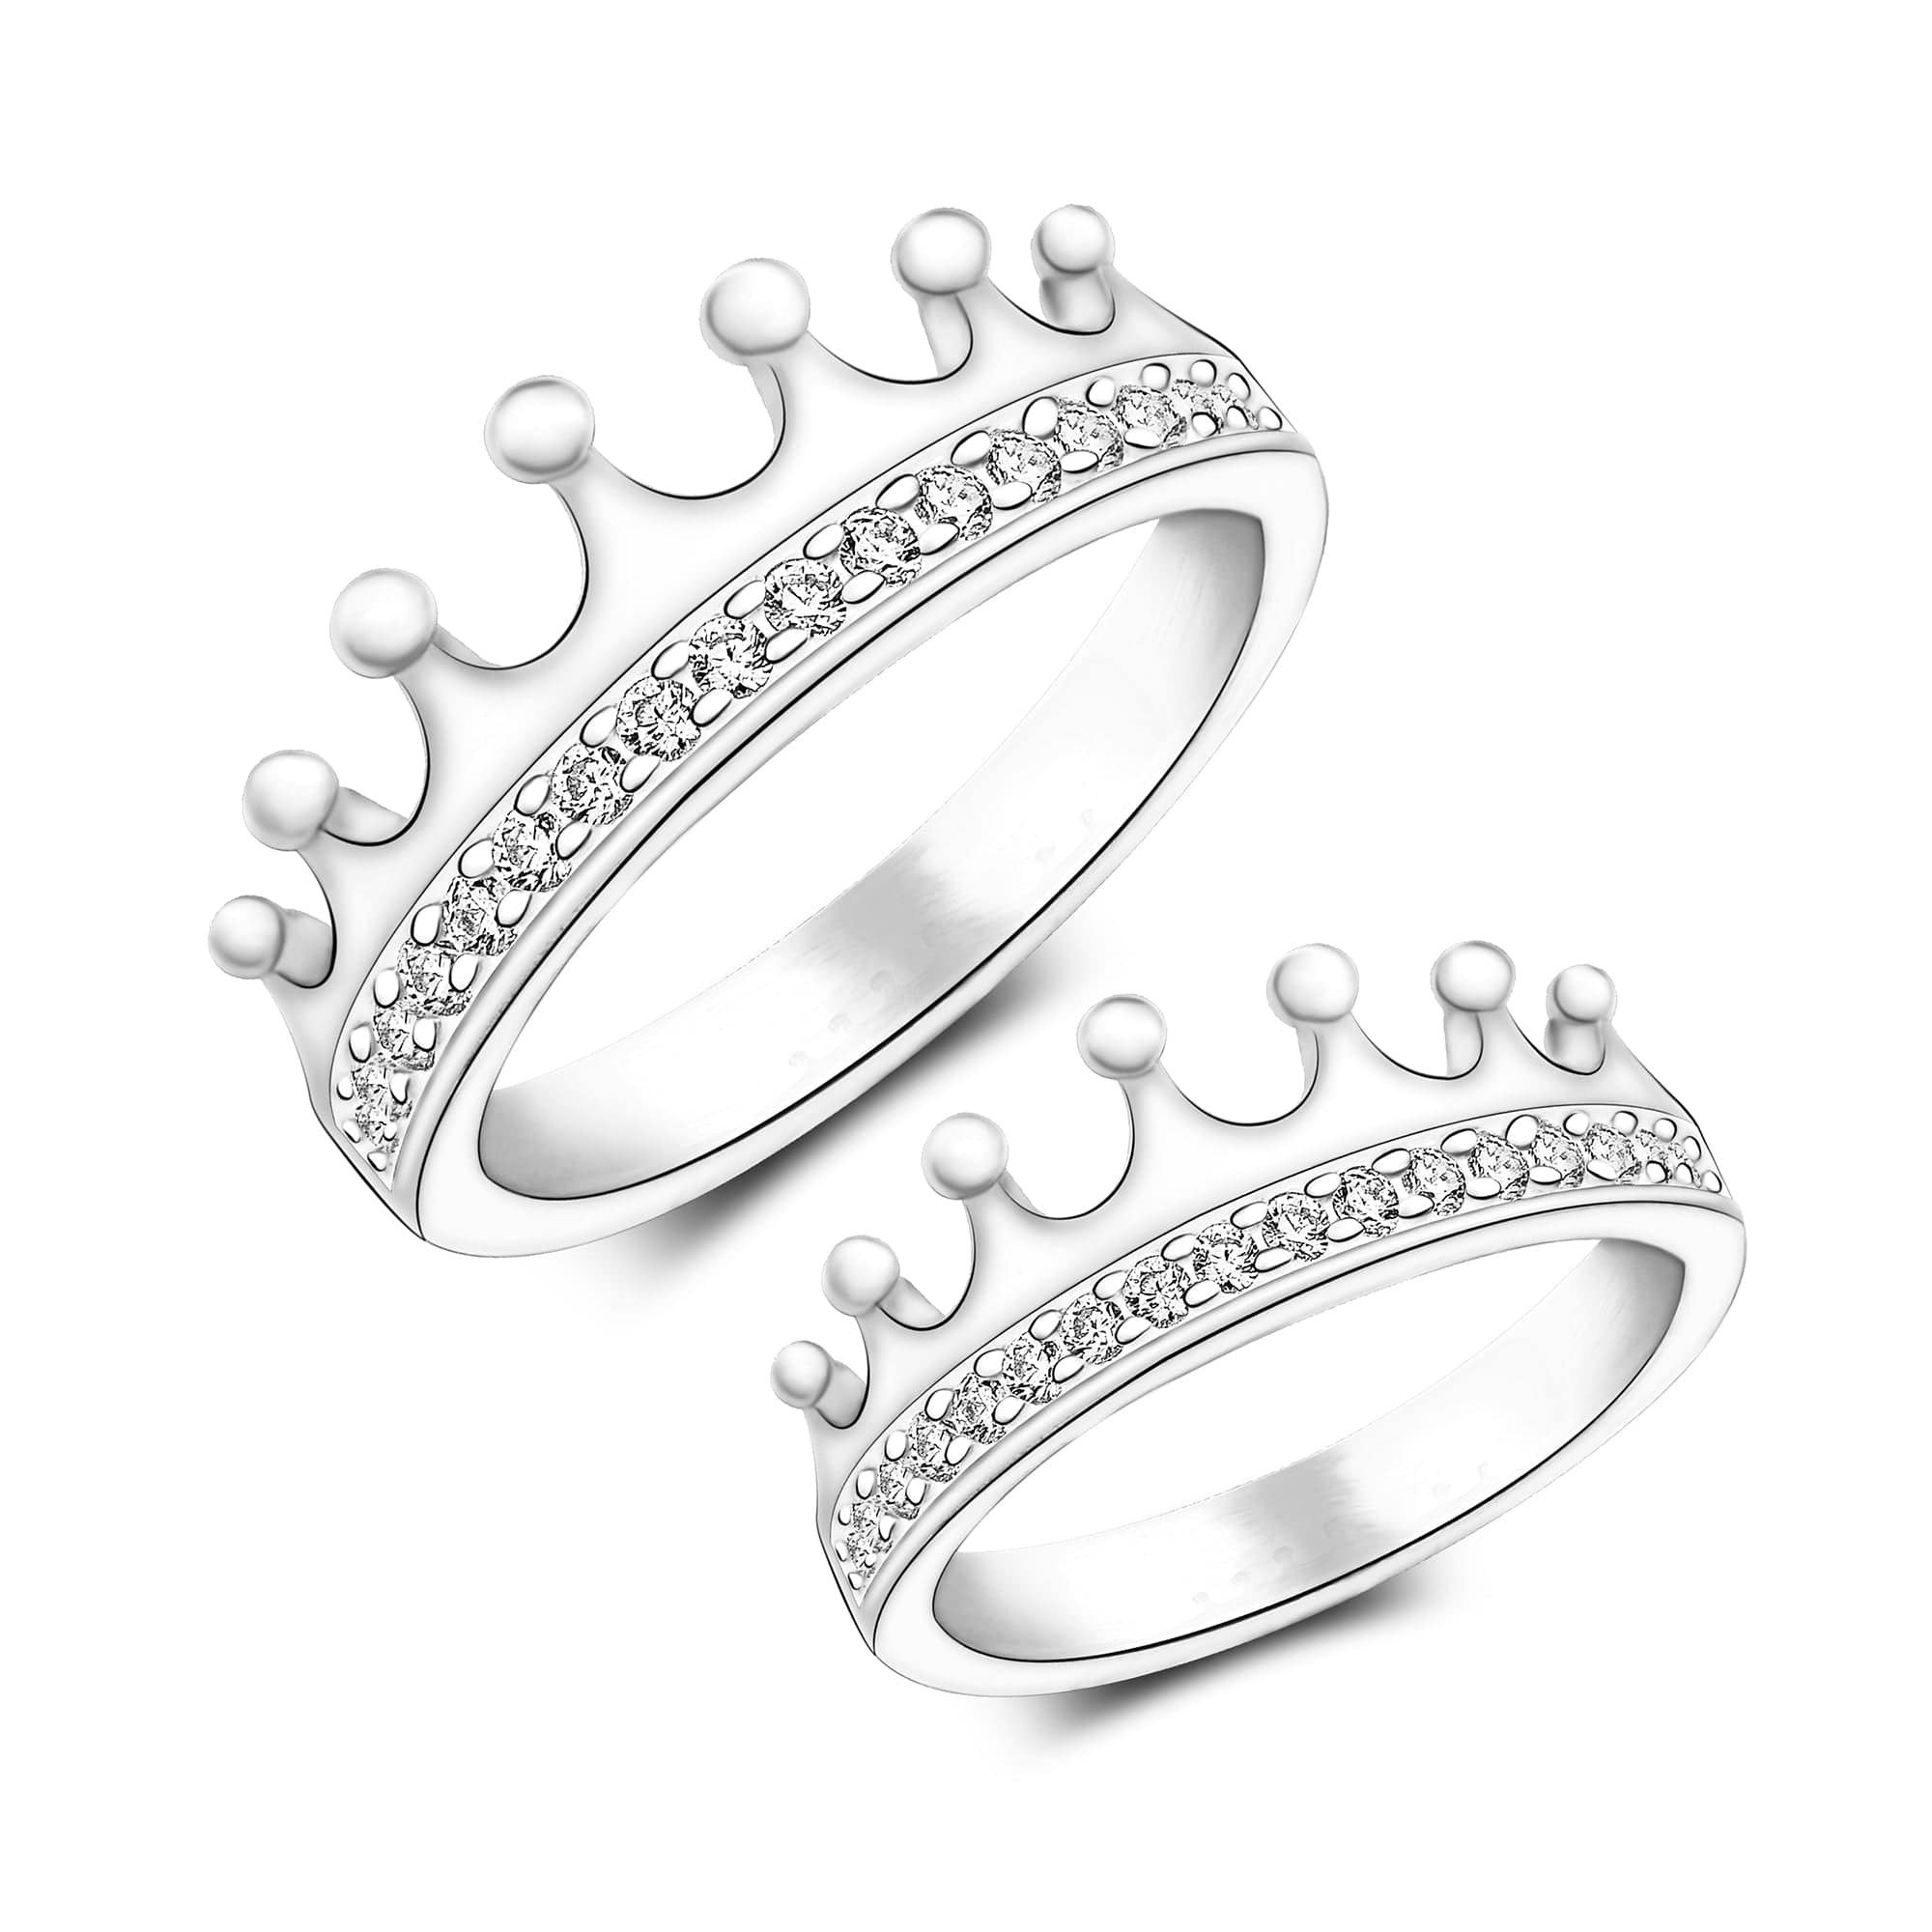 King & Queen,crown ring set,18k gold plated silver crown ring set,tiara  rings,mens crown ring,princess crownd ring,crown band – UNIQUENEWLINE